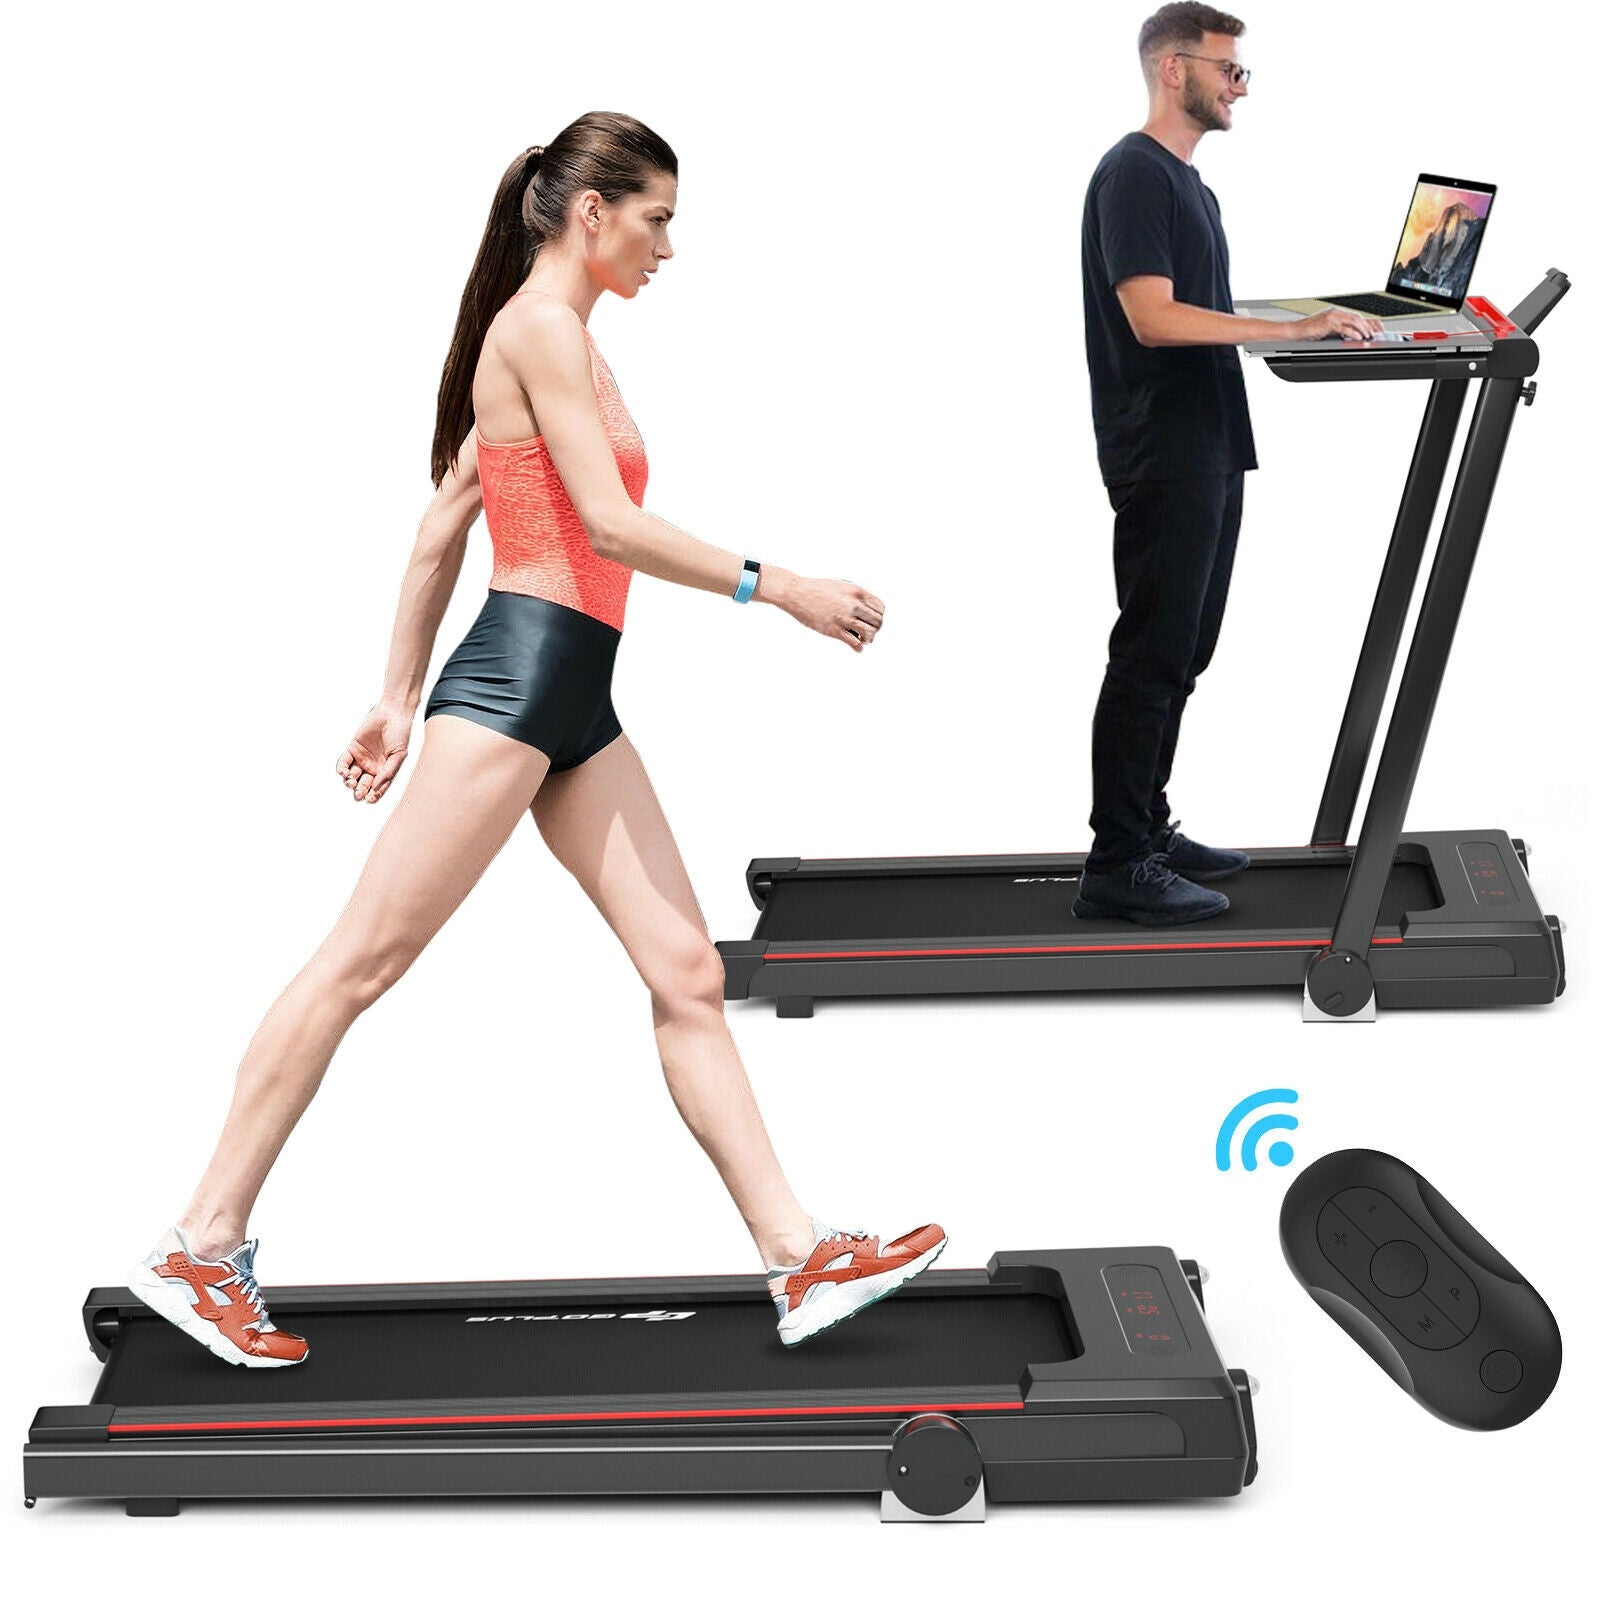 3-in-1 Folding Under Desk Treadmill with Large Desk and LCD Display